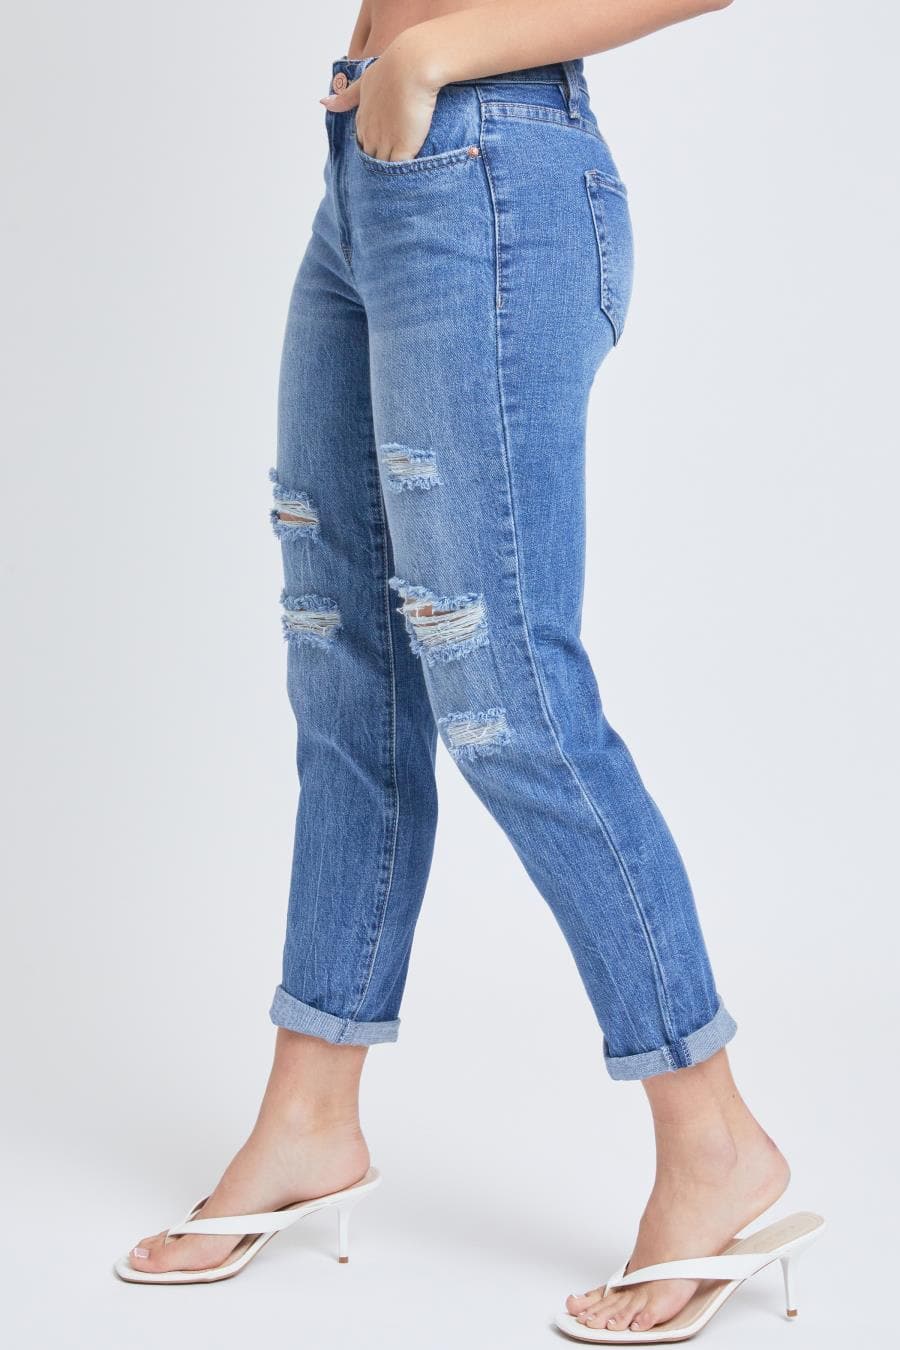 Junior Hybrid Dream Easy Fit Boyfriend Jean With Rolled Cuffed Ankle P51868